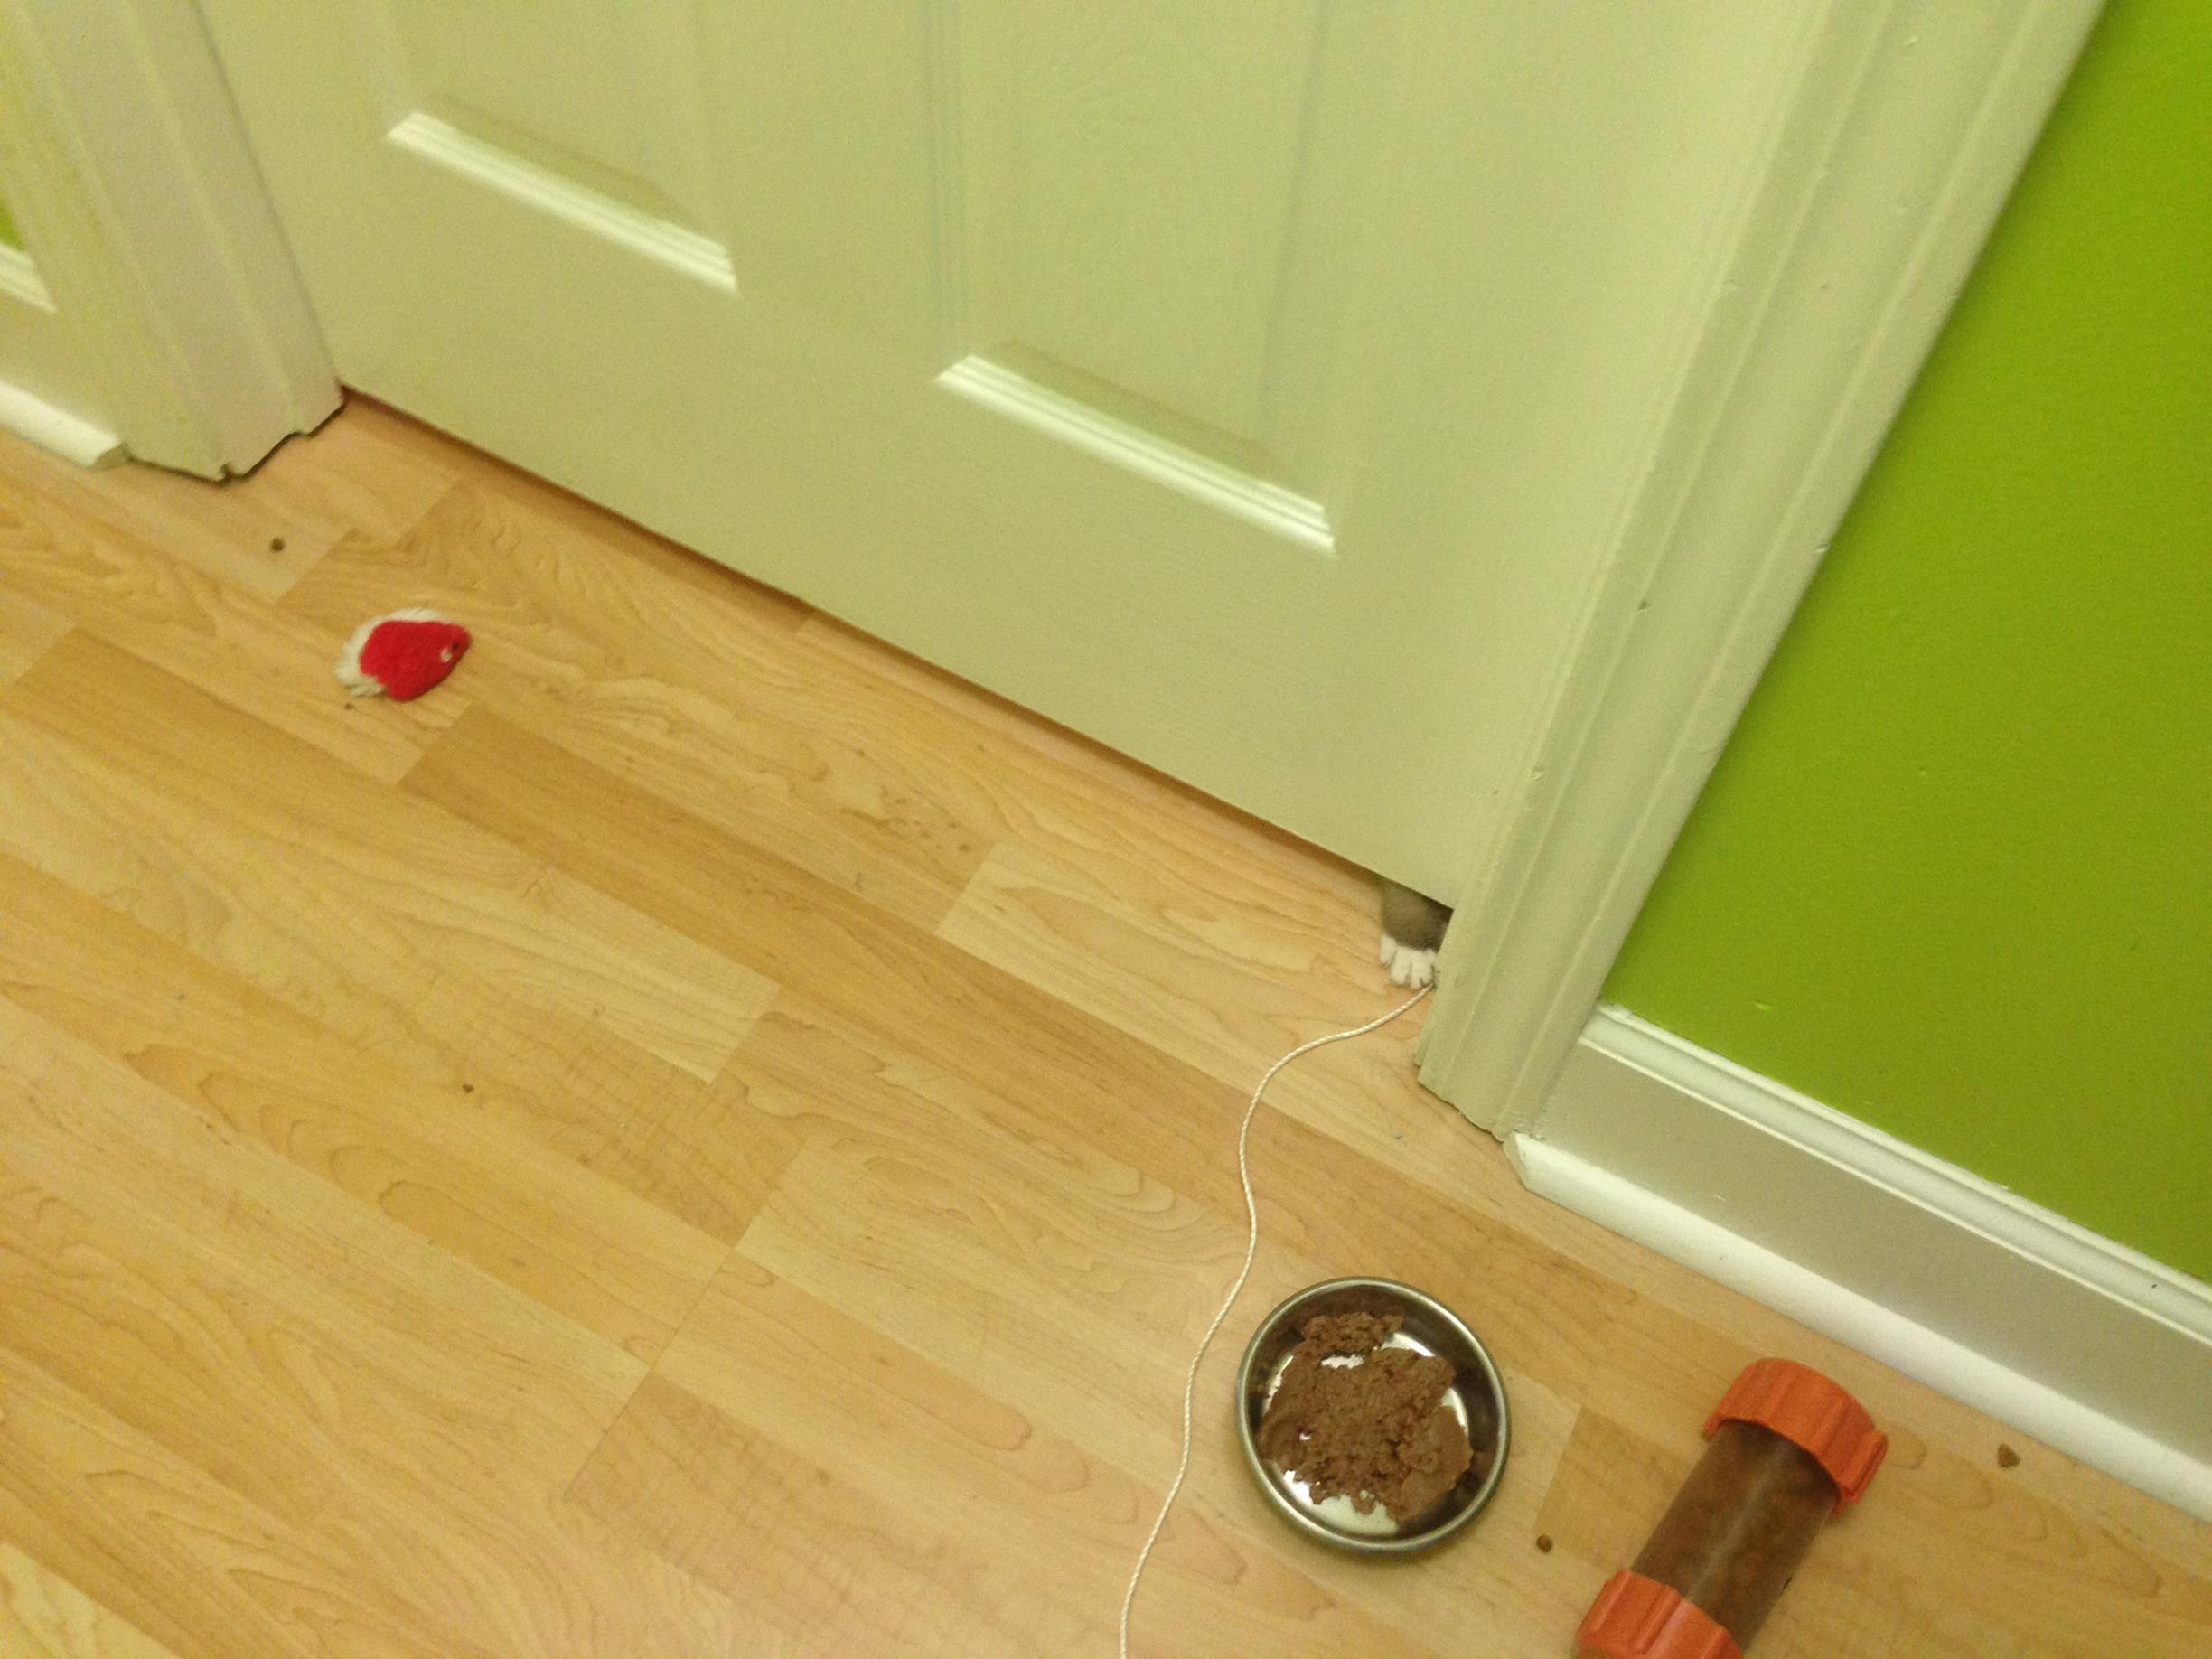 Toys, wet food, a food puzzle offered on both sides of a solid door (& cute footsie).